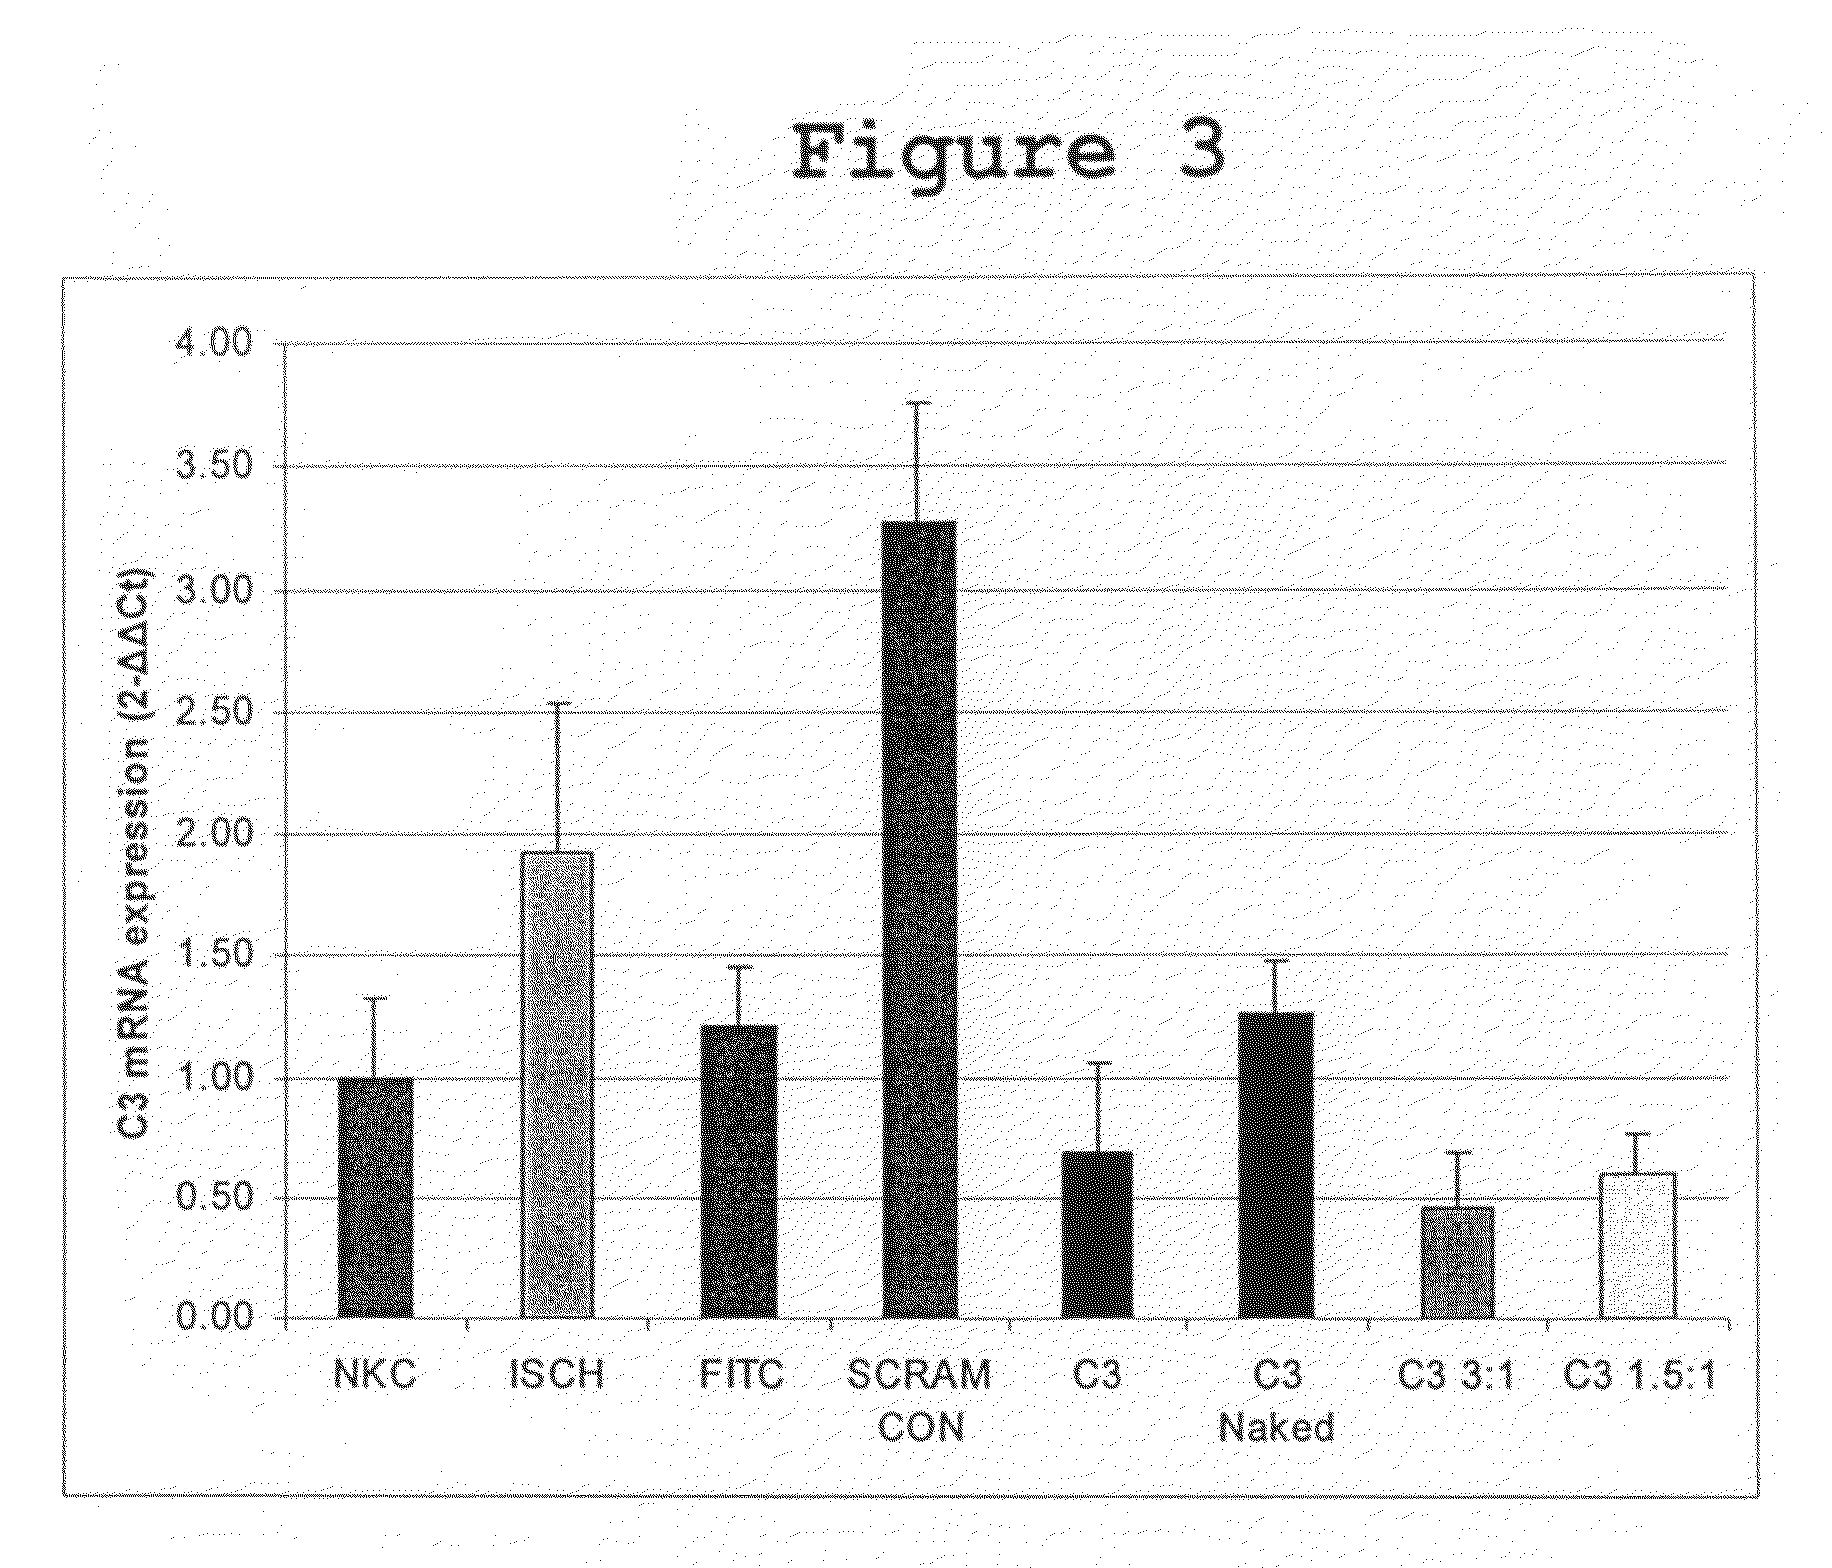 Compositions and Methods of Using siRNA to Knockdown Gene Expression and to Improve Solid Organ and Cell Transplantation